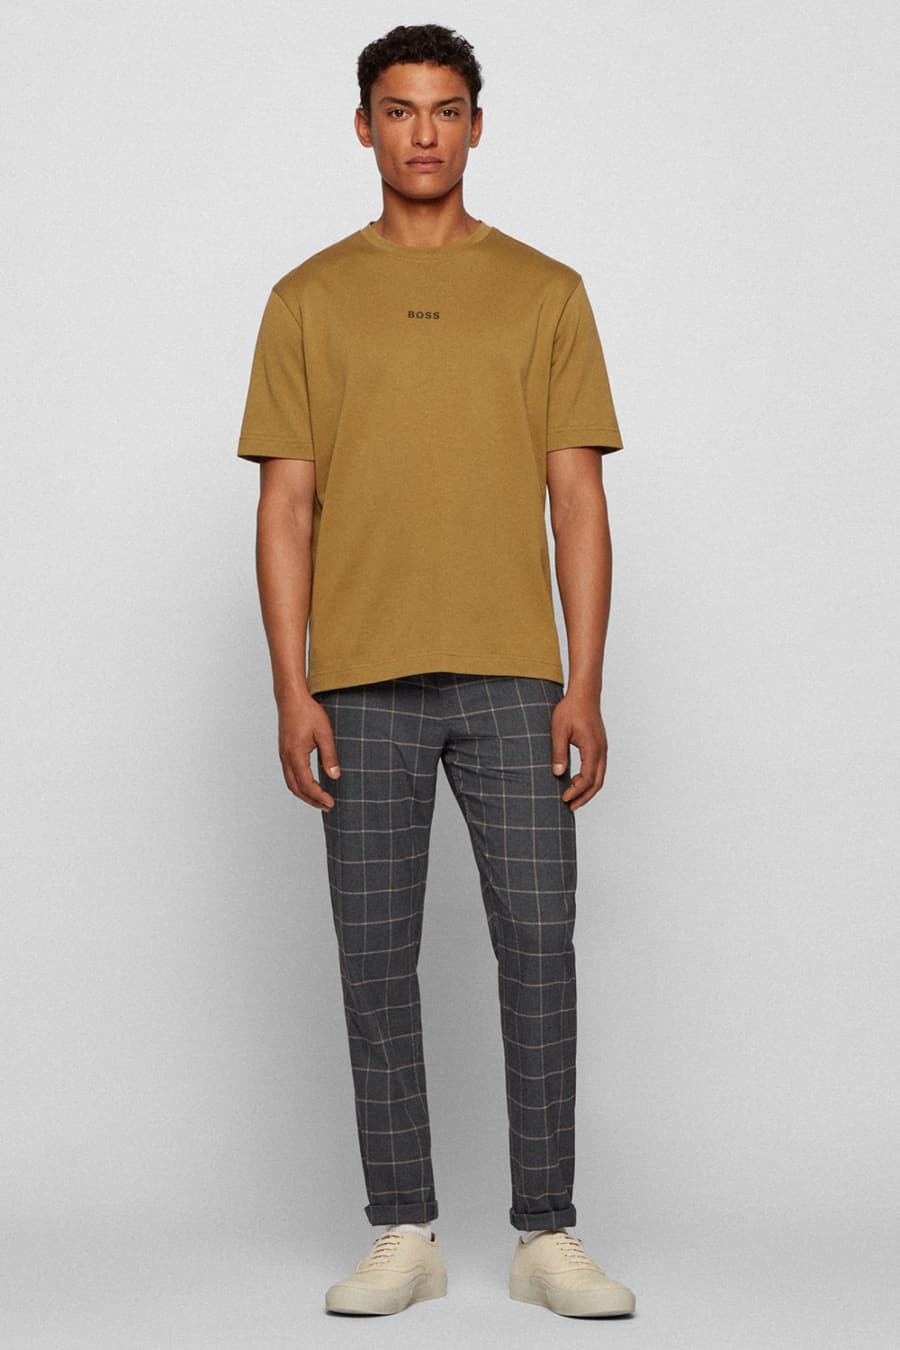 Men's plaid pants, mustard T-shirt and sneakers outfit